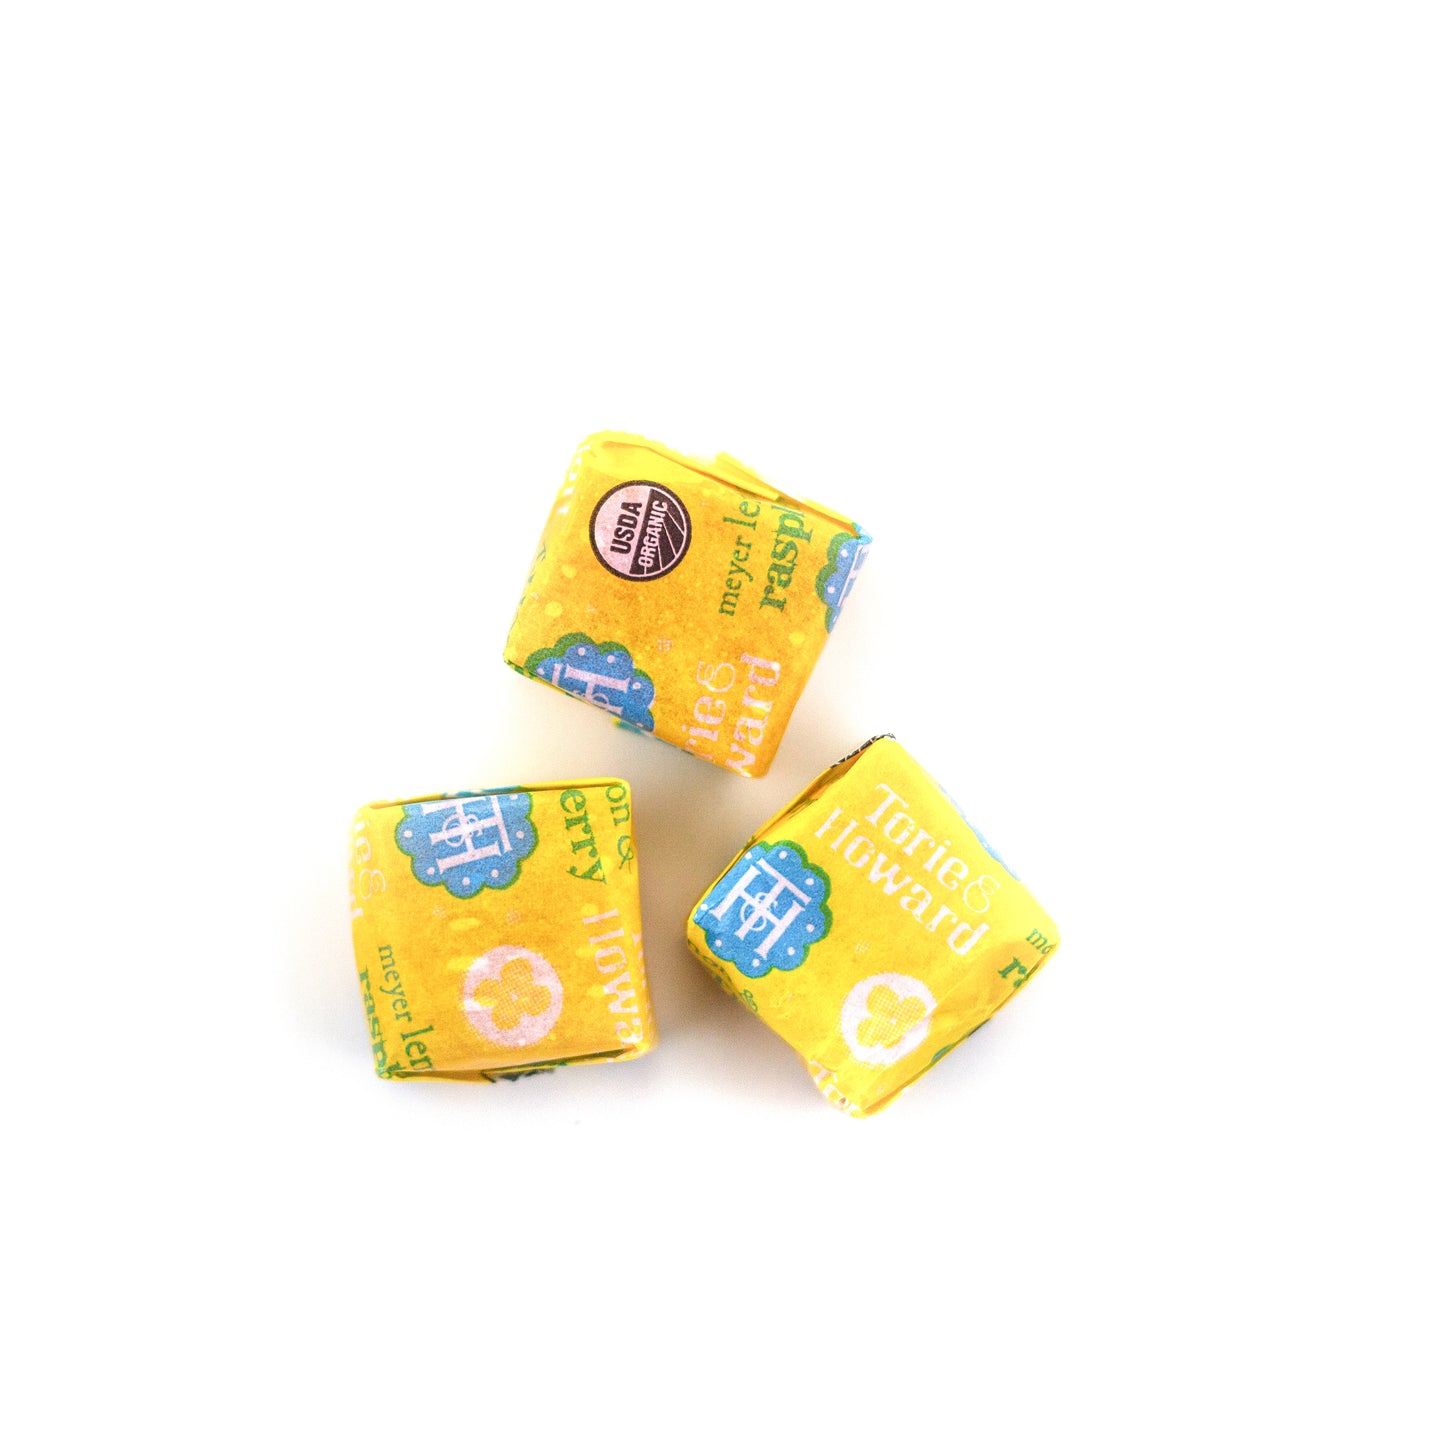 Individually wrapped Meyer Lemon & Raspberry organic chewy candies